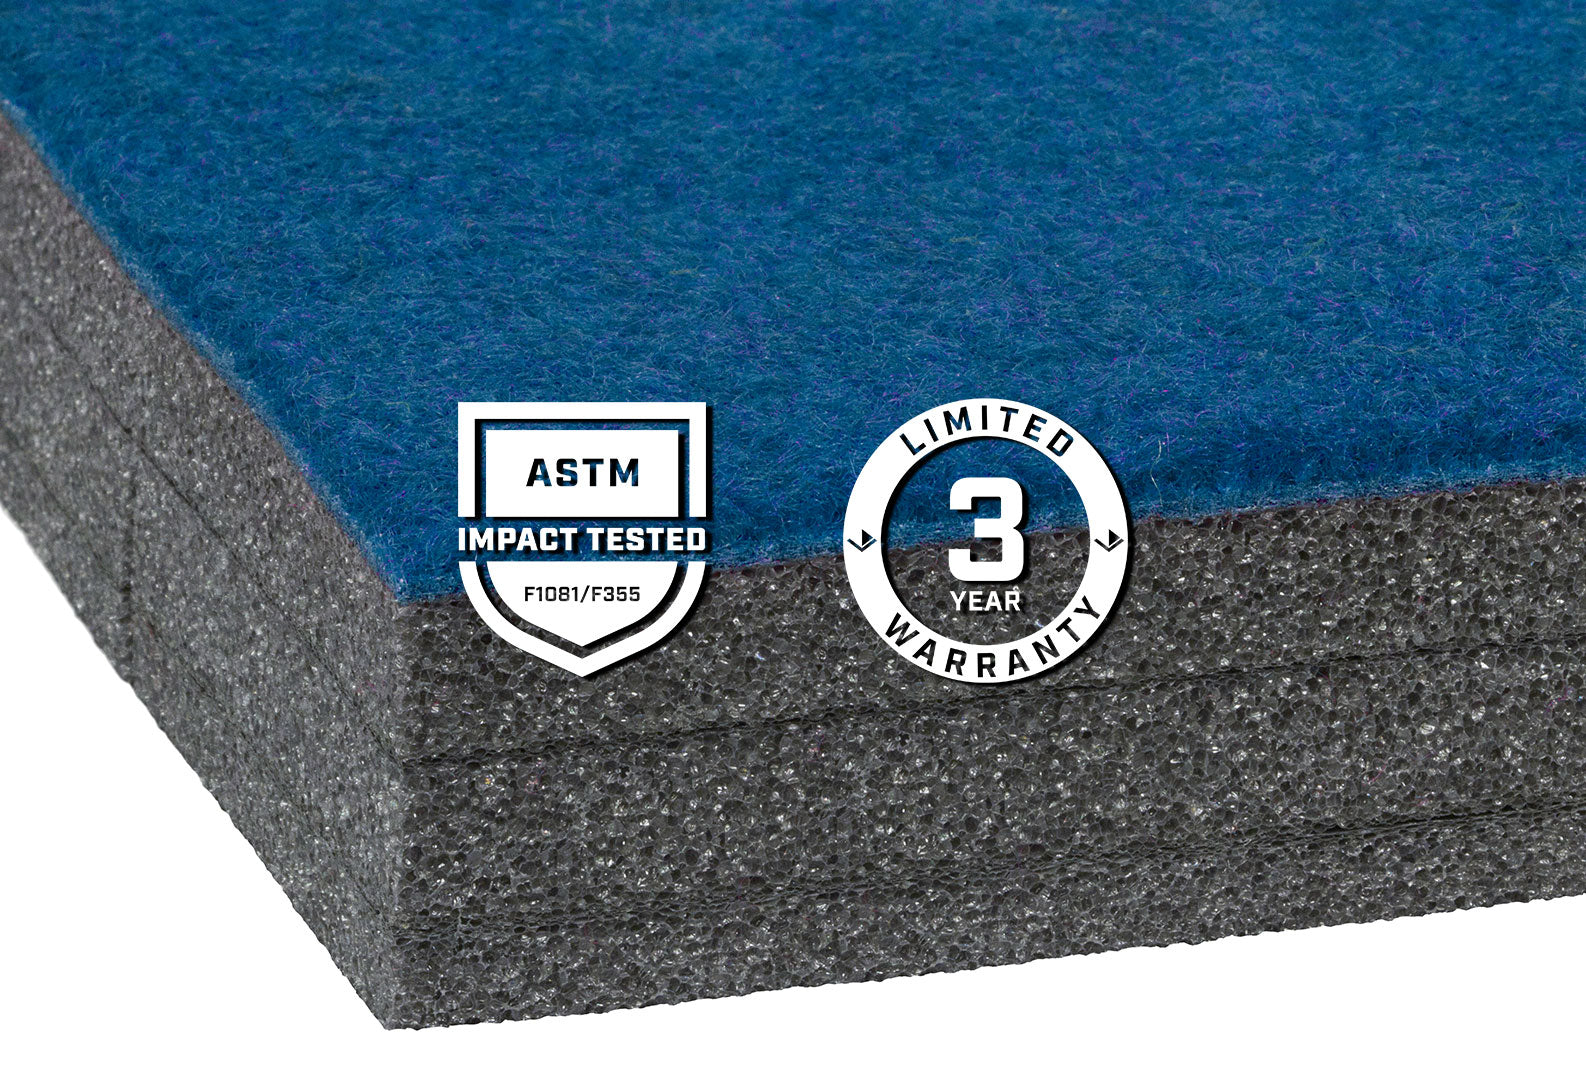 Mat detail with ASTM logo and warranty logo